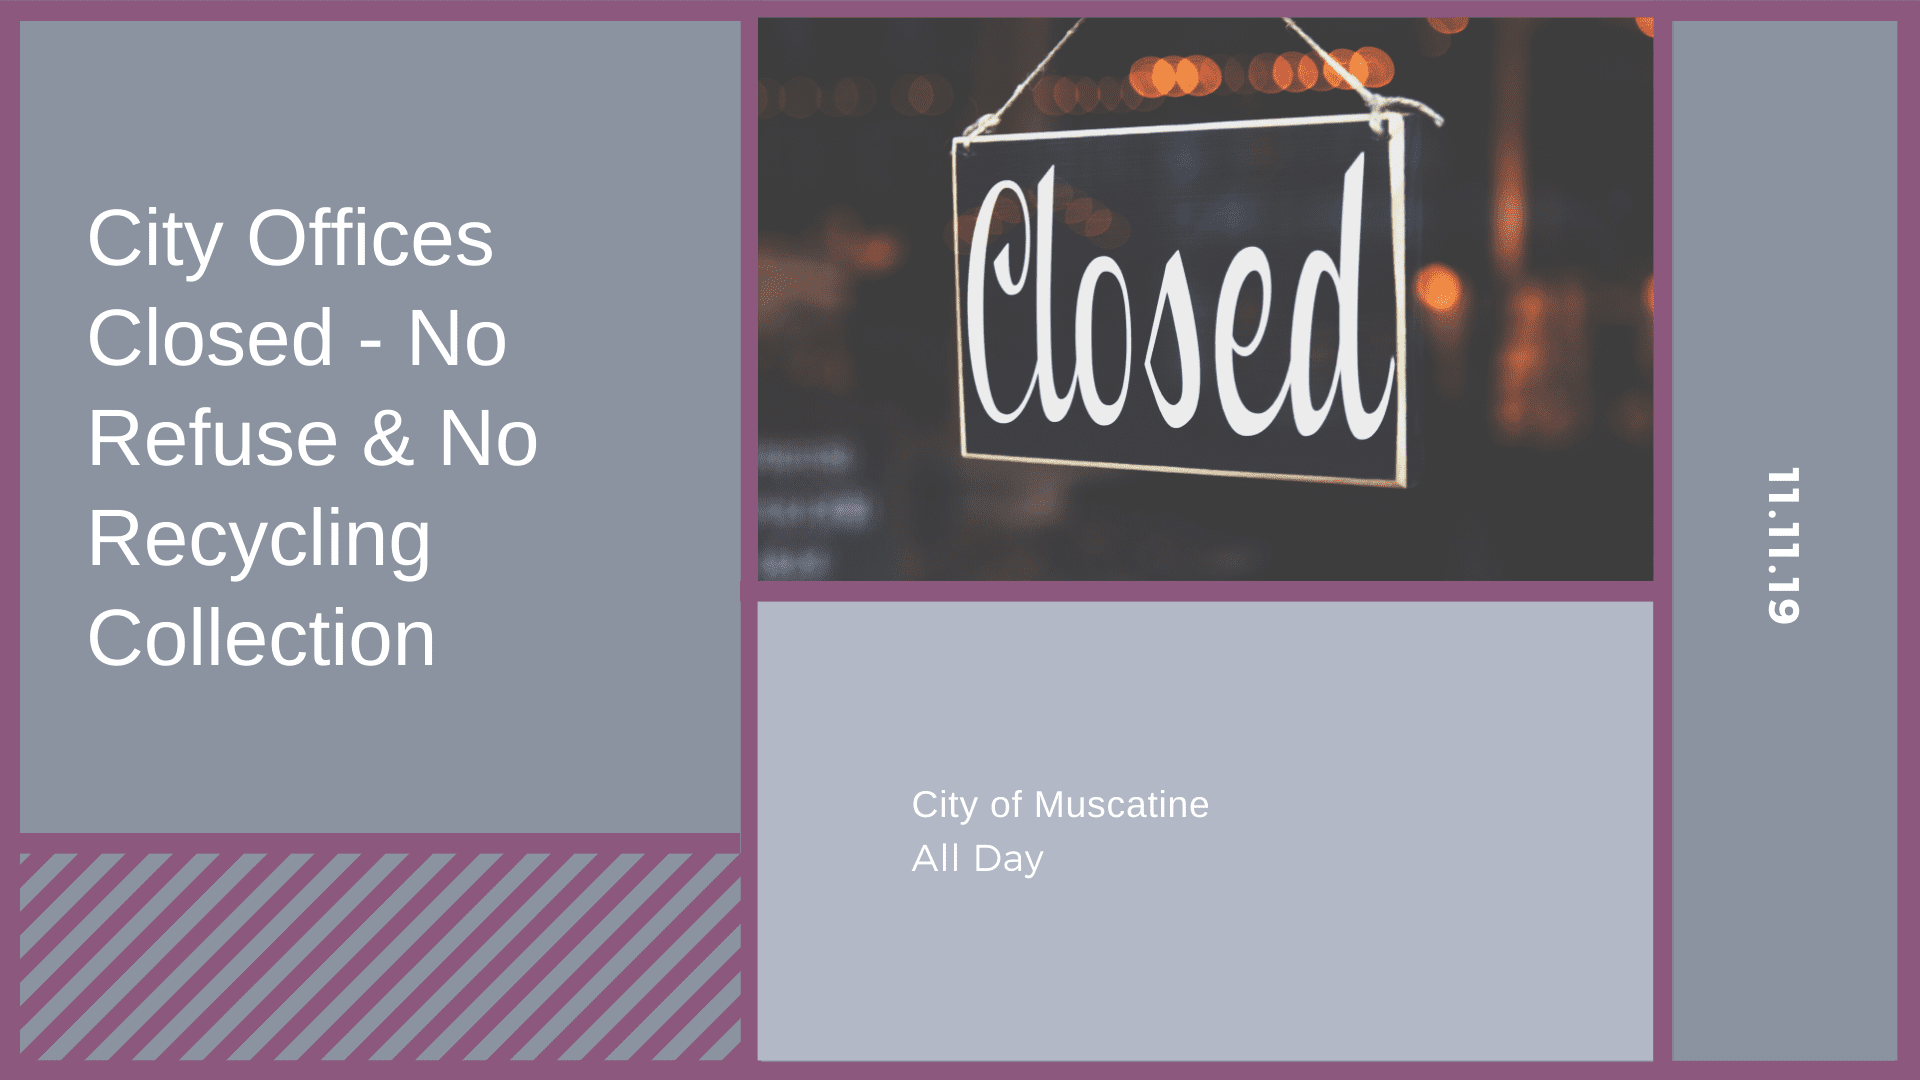 City Offices Closed - No Refuse & No Recycling Collection